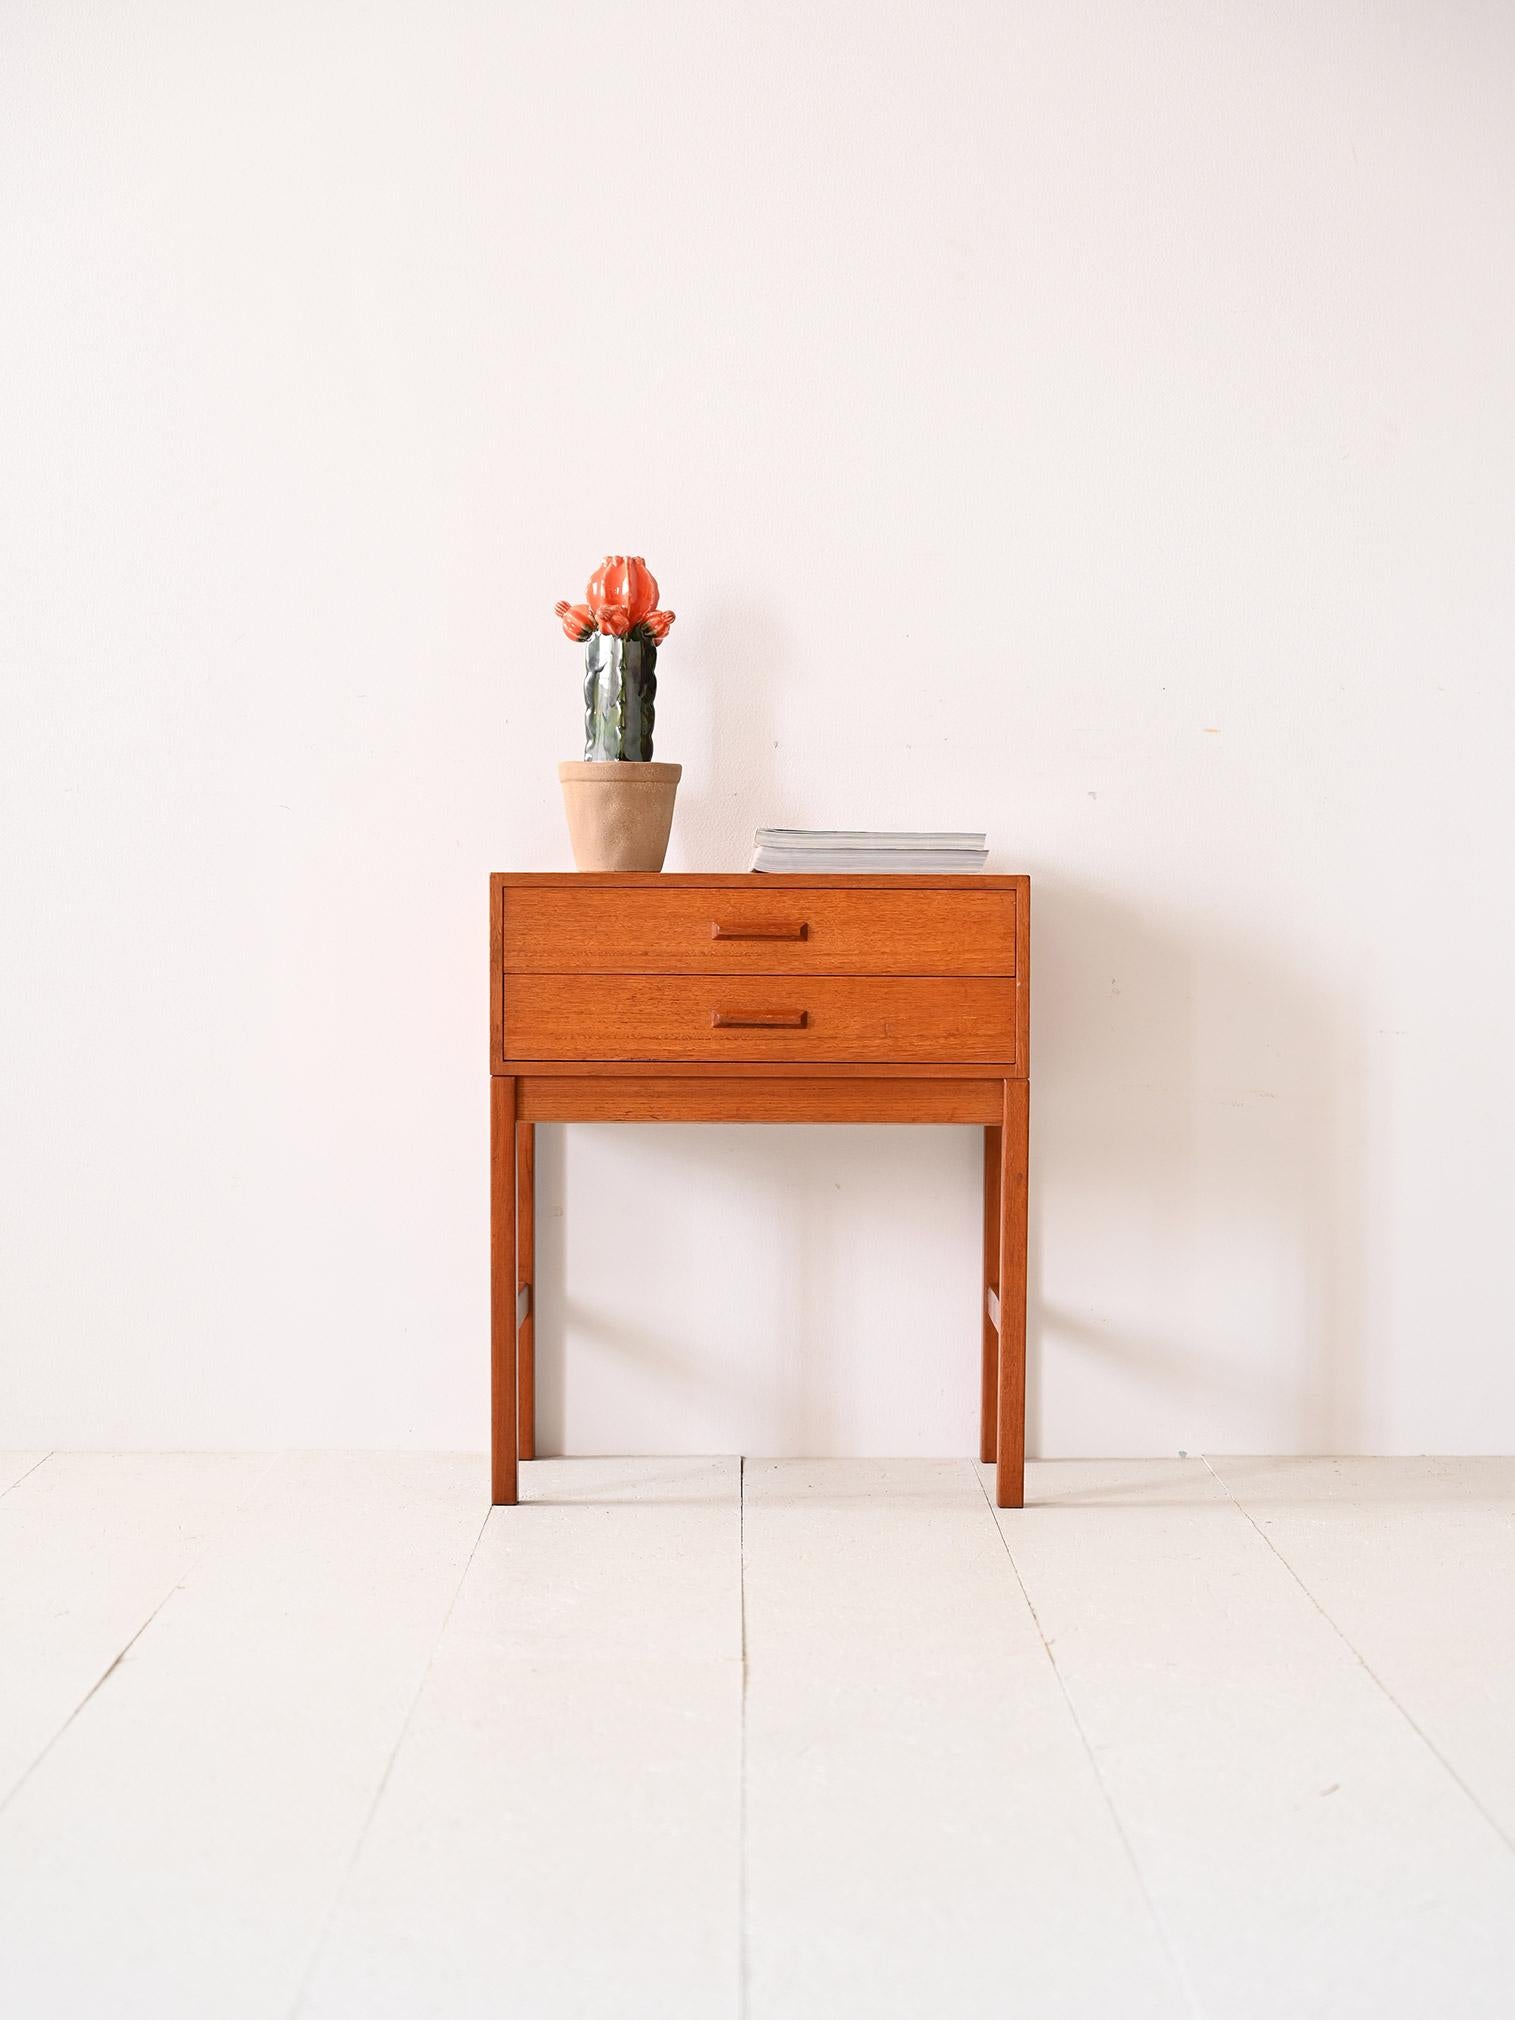 Scandinavian square teak coffee table.

This piece of modern Scandinavian furniture is distinguished by the regular, square lines that make up the top and the long legs. The two drawers feature a wooden handle, also with a defined cut-out.
Perfect